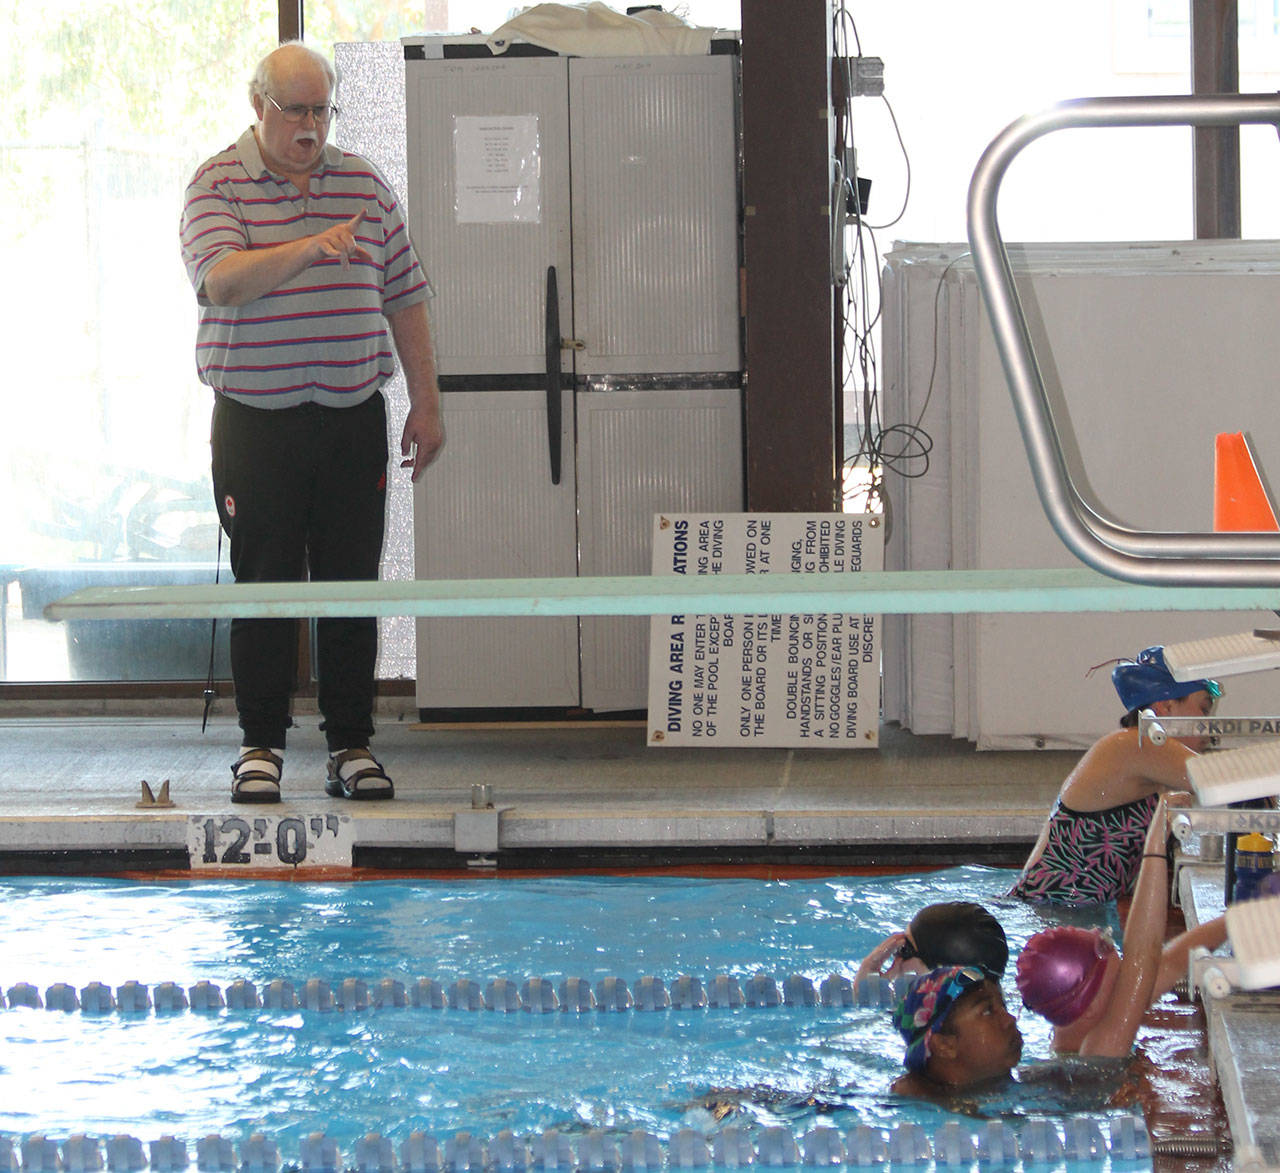 North Whidbey Aquatic Club coach Frank Comerford, left, instructs several of his team members at practice last week. (Photo by Jim Waller/Whidbey News-Times)